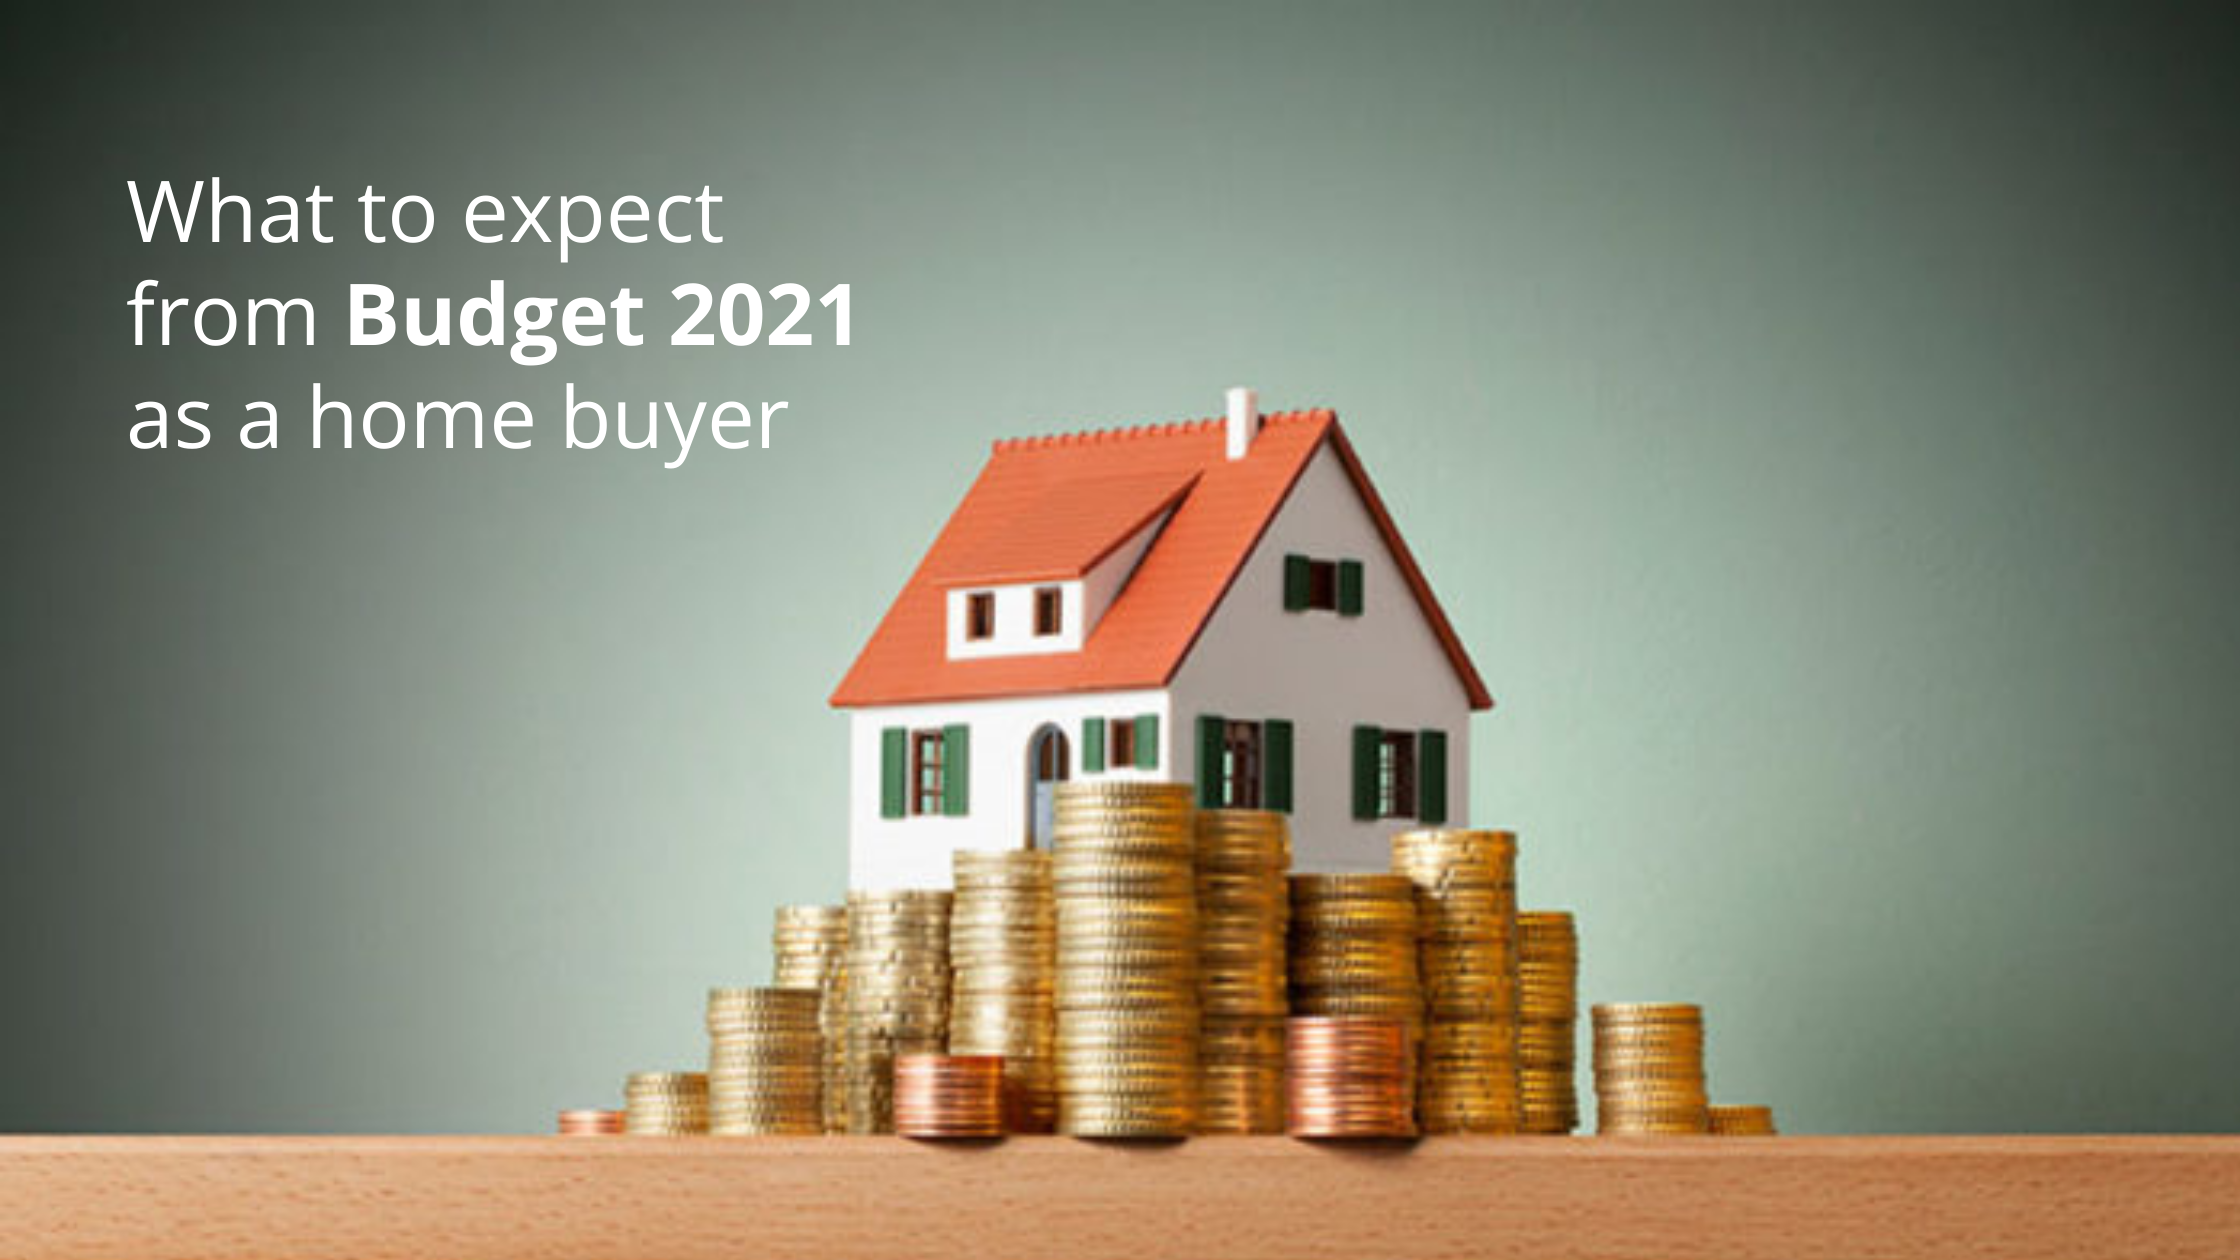 What to expect from Budget 2021 as a homebuyer